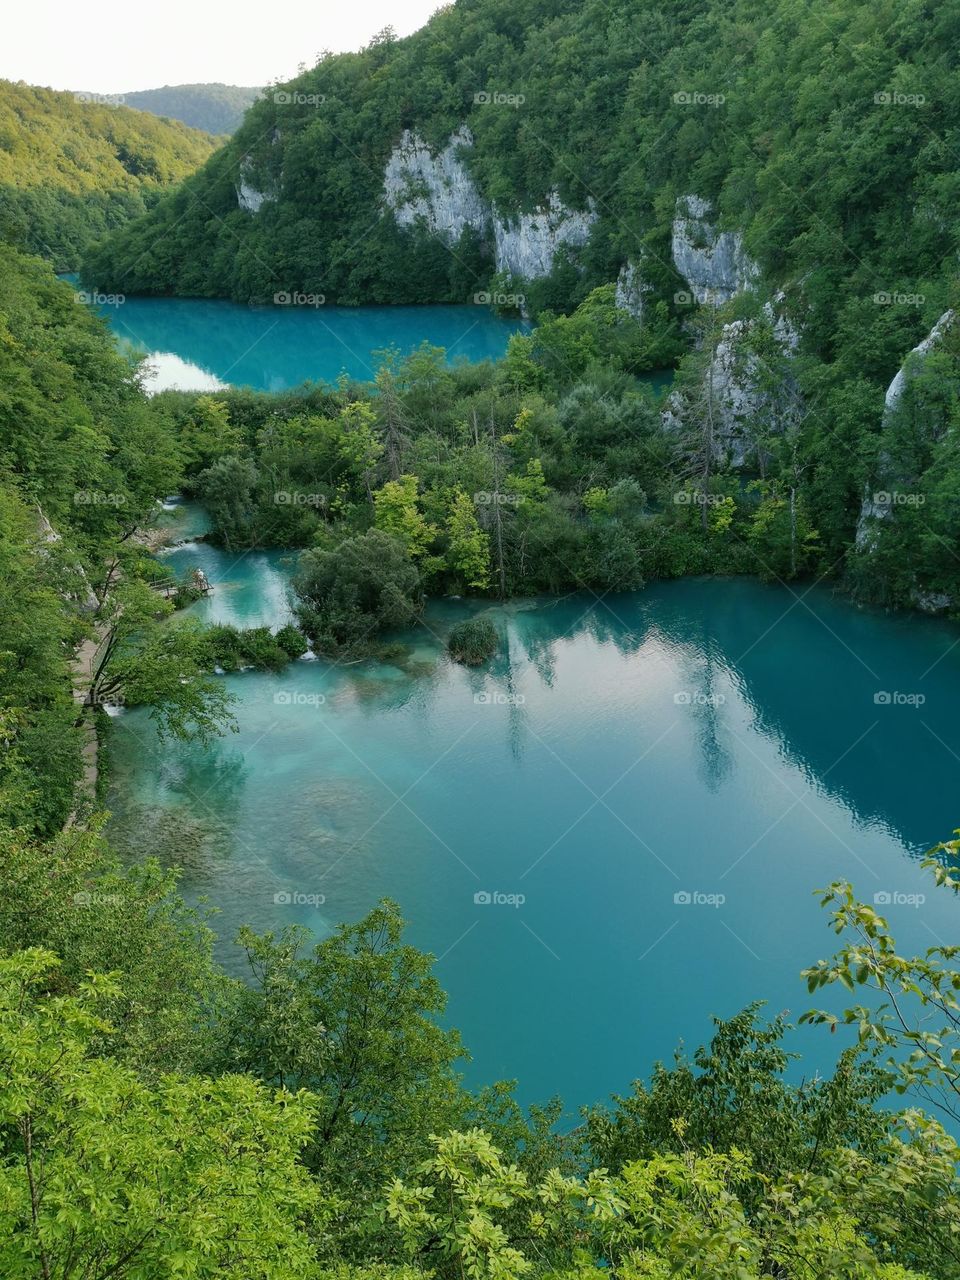 Let's go on a hike. Amazing Croatian nature. Plitvice lakes. Blue lakes, beautiful views, heartbreaking scenery.